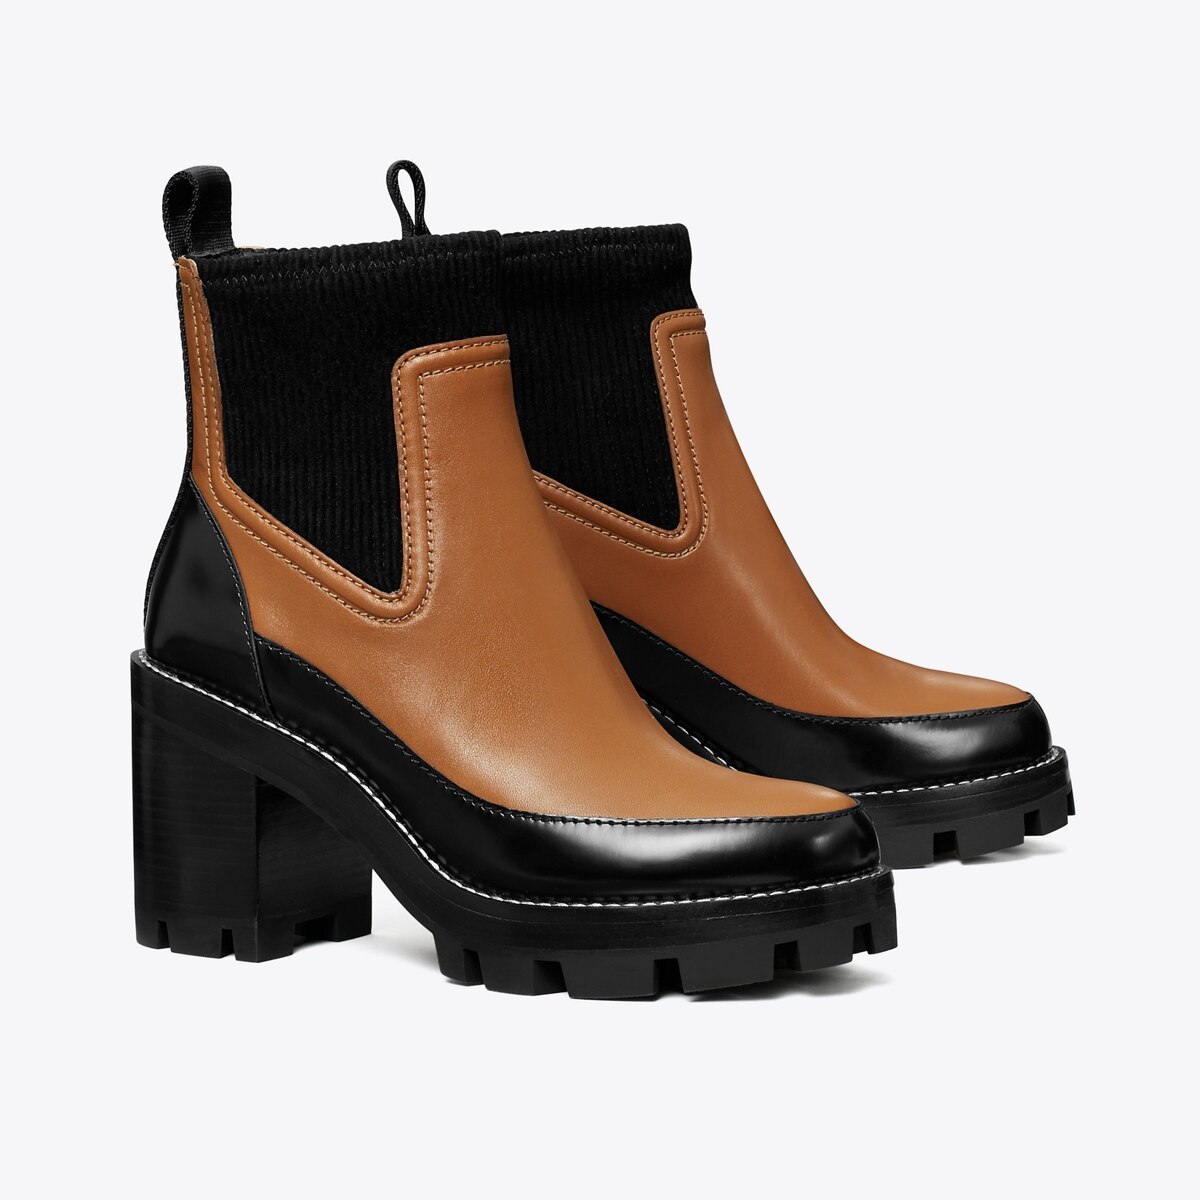 Lug-Sole Heeled Ankle Boot: Women's Designer Ankle Boots | Tory Burch